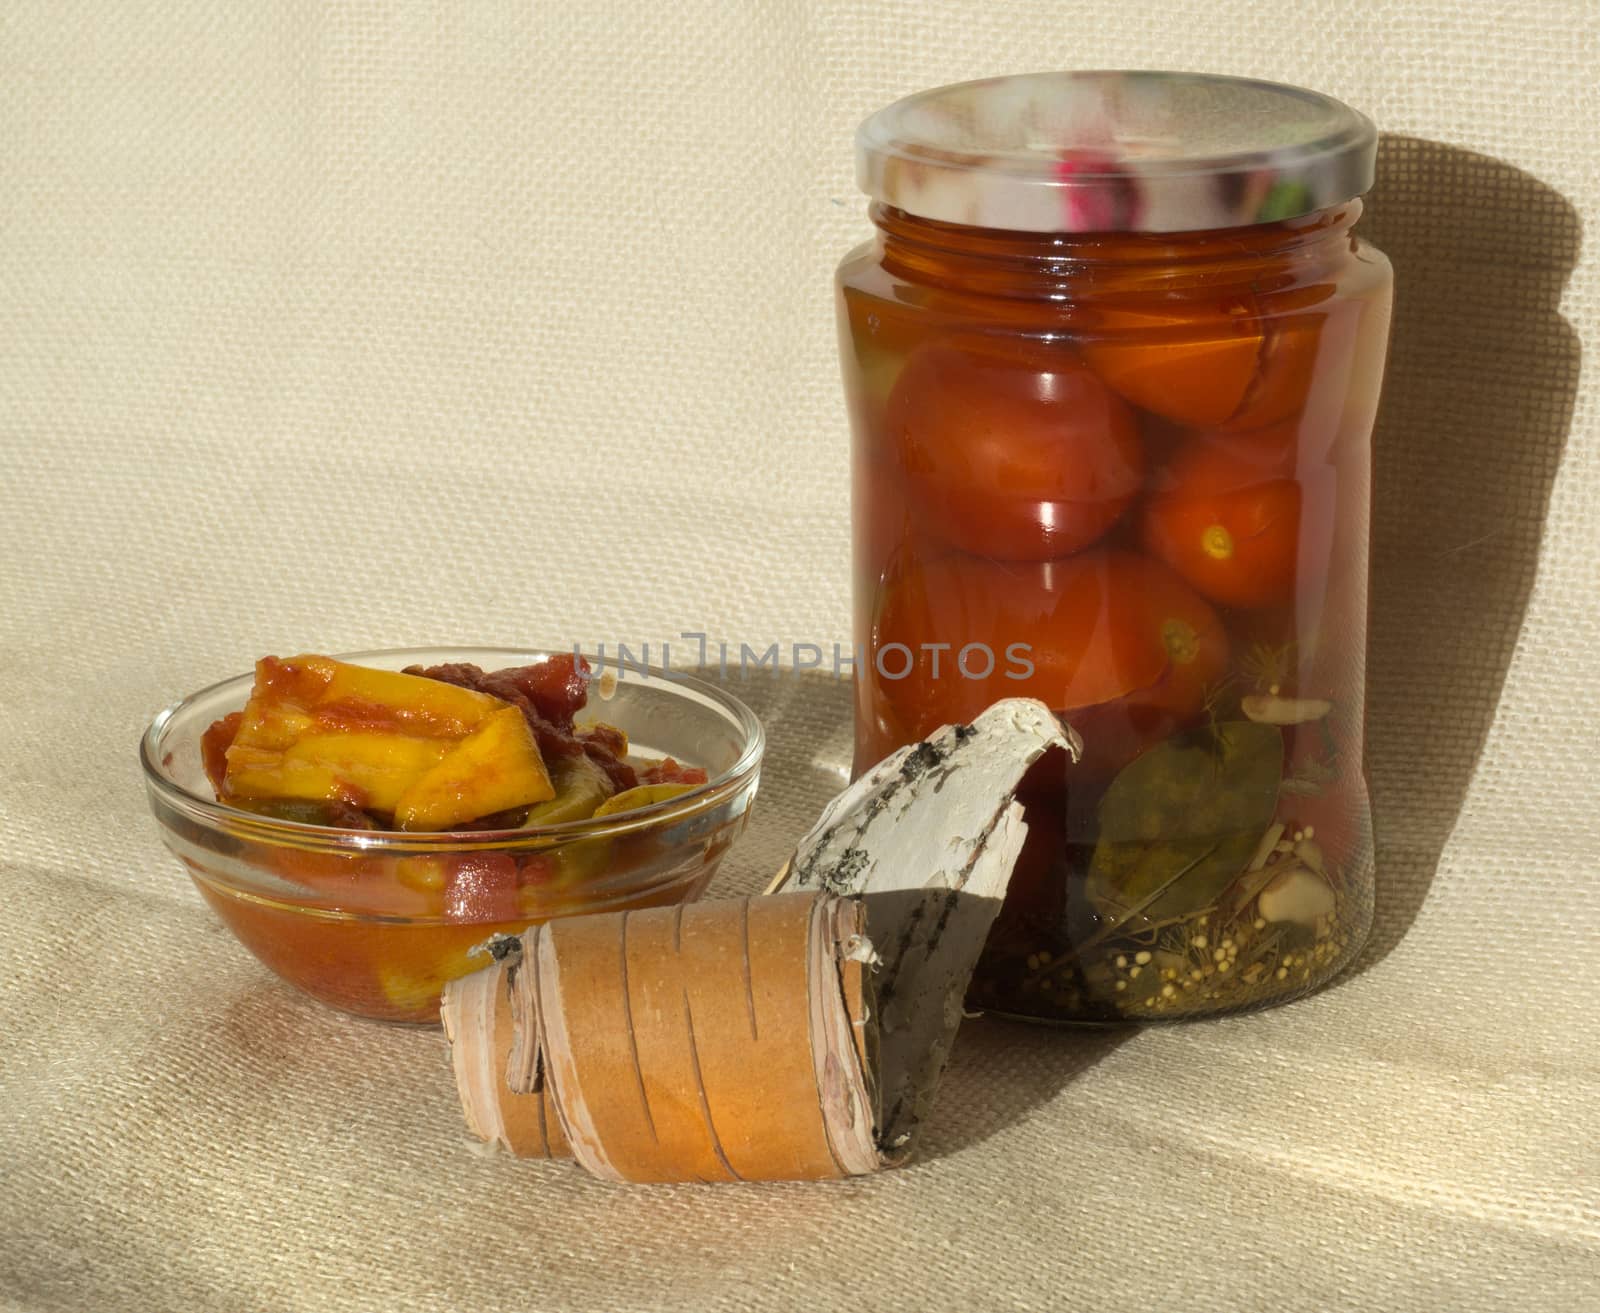 A jar of pickled tomatoes, a bowl of pickled hot peppers on a background of flax and birch bark